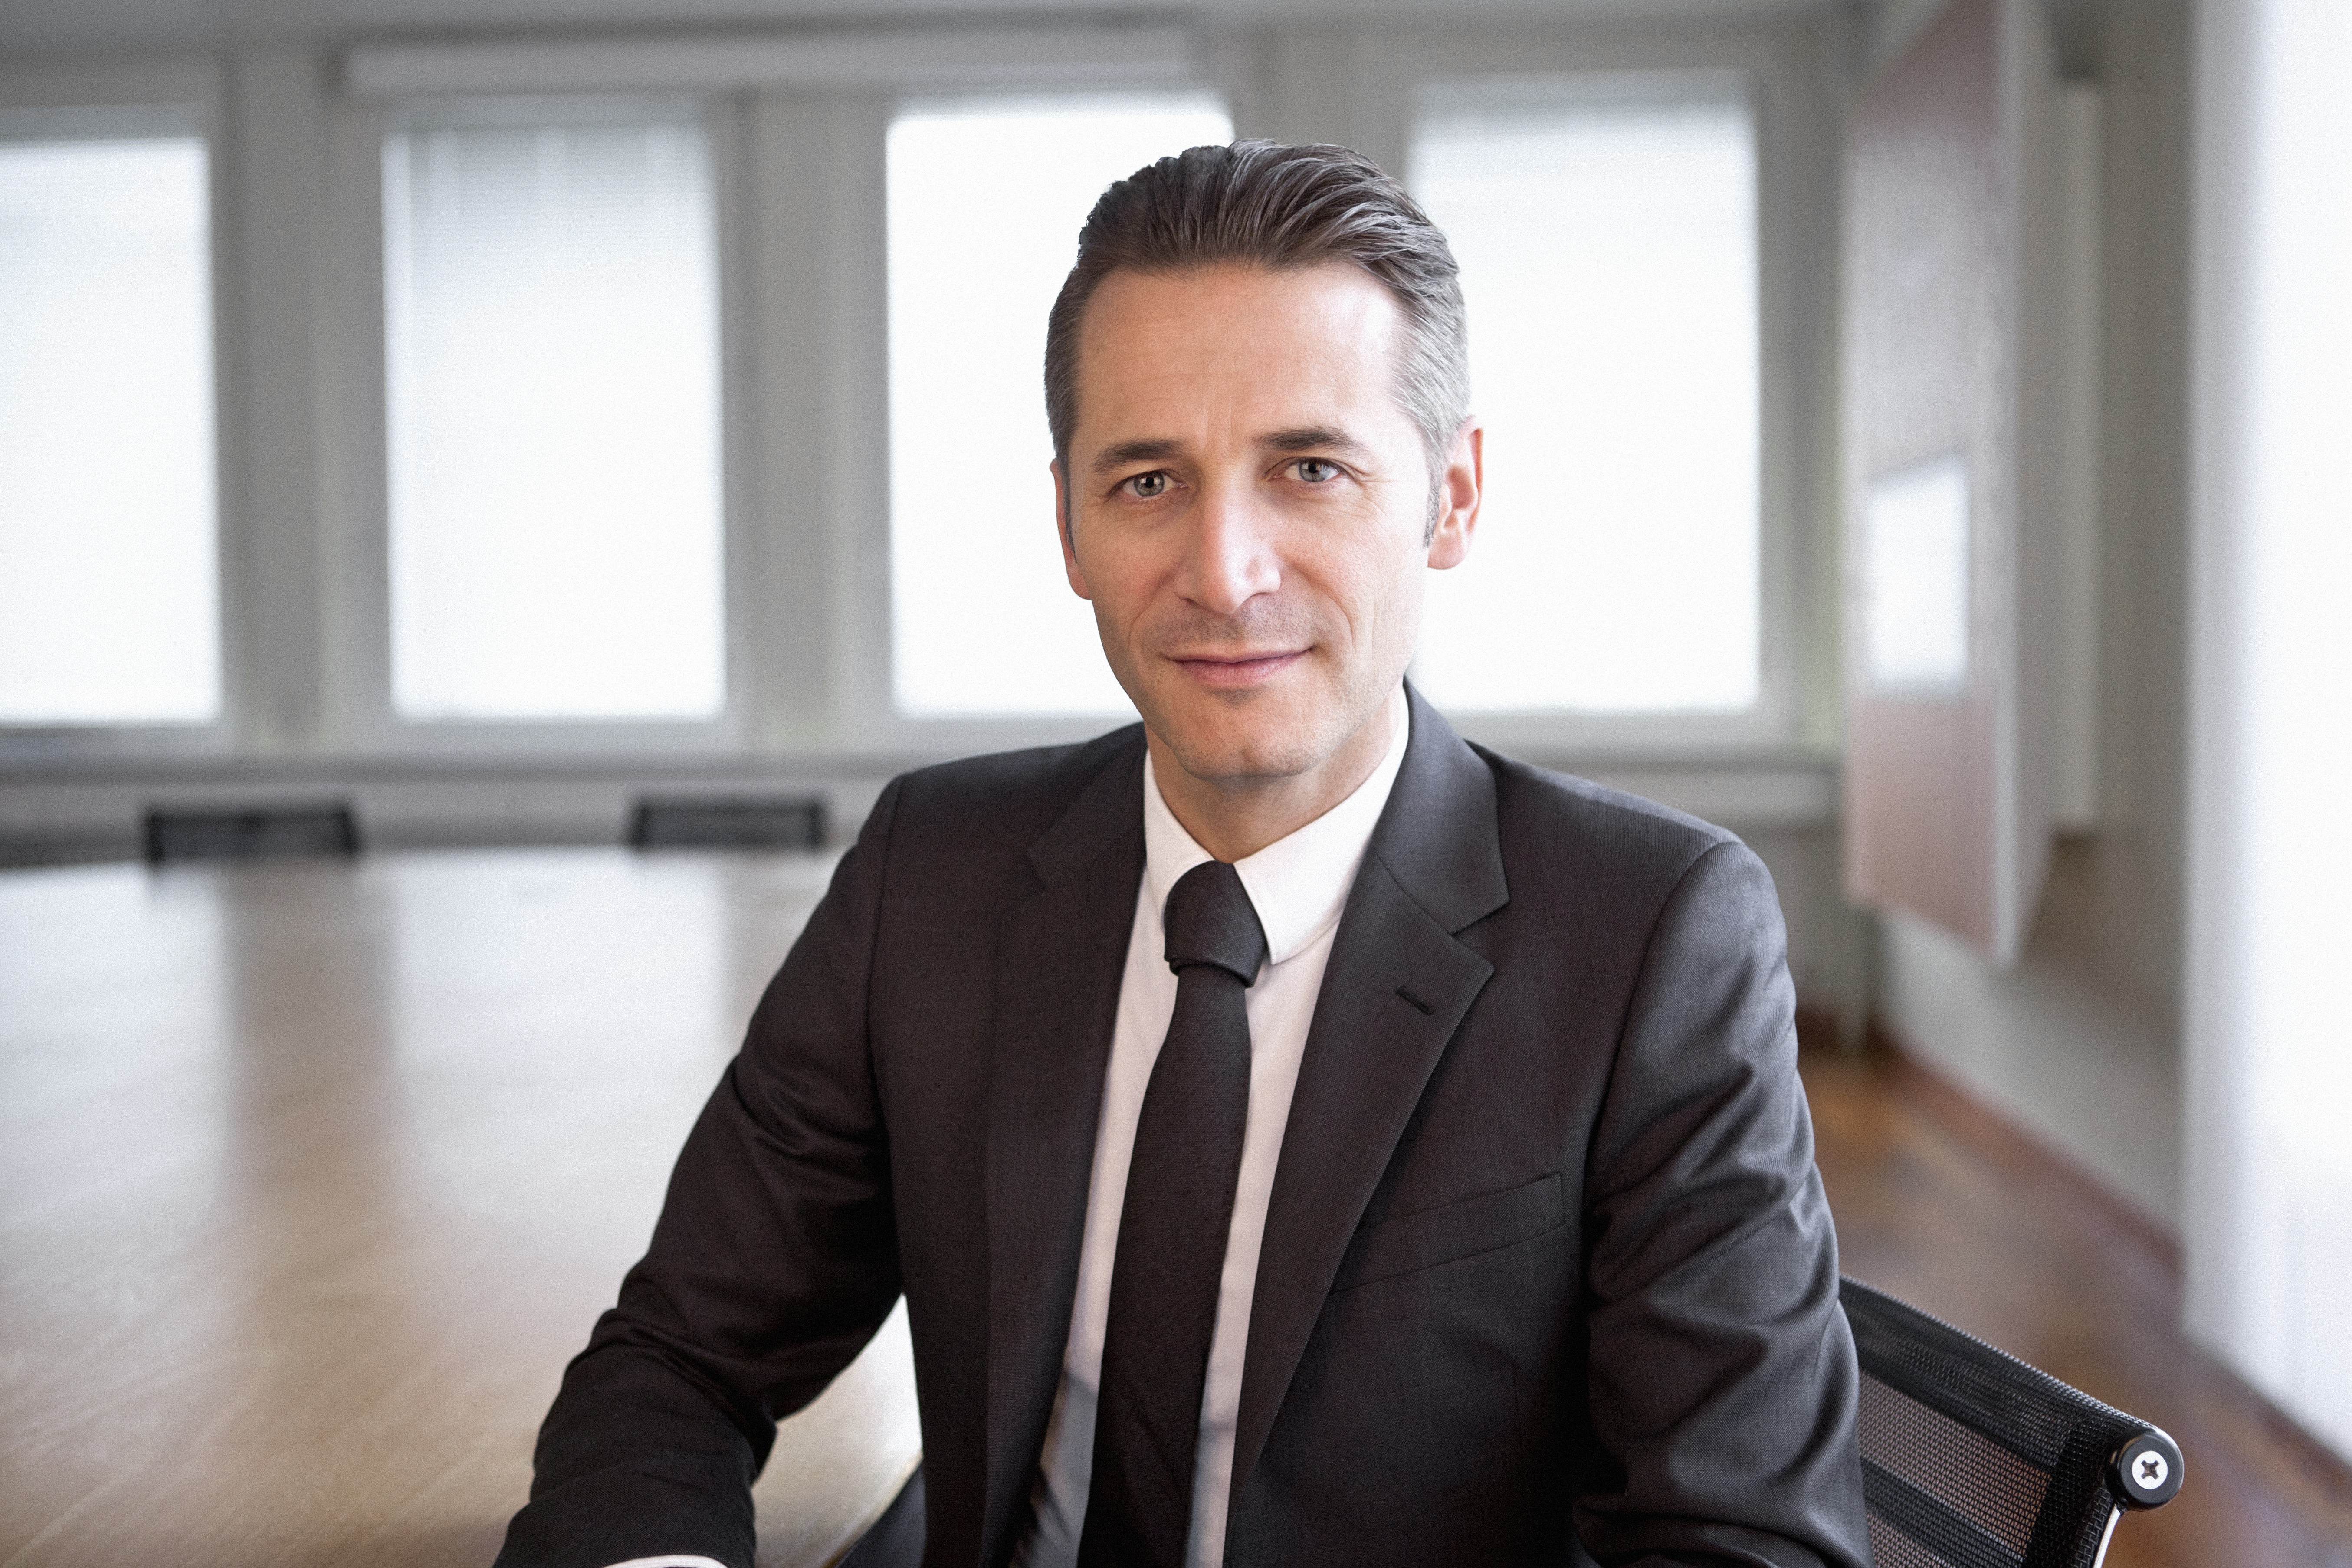 Raynald Aeschlimann, President and CEO of Omega